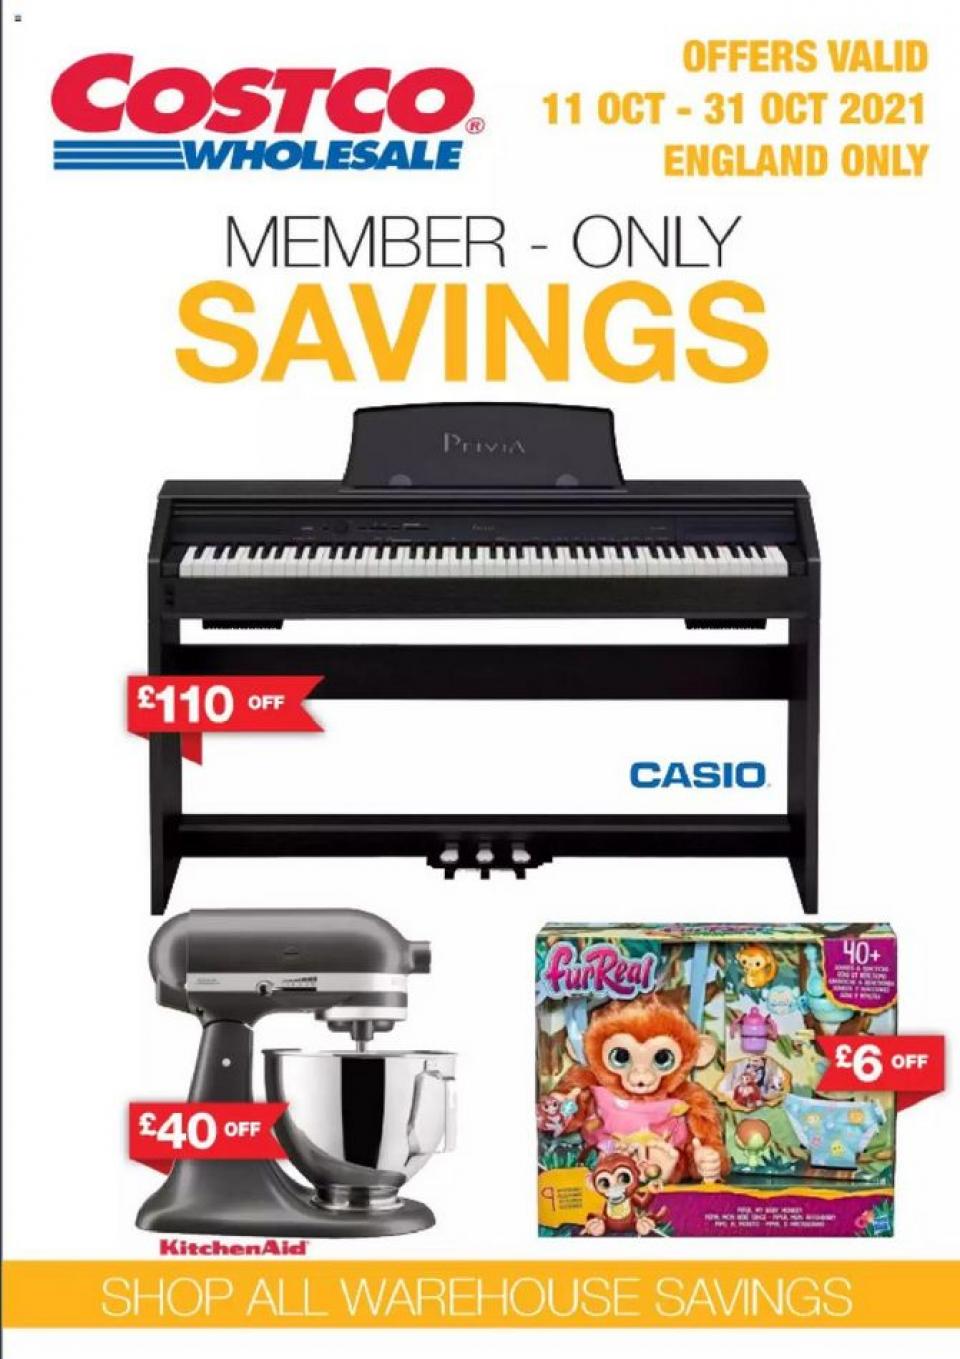 Costco Offers Member-Only Savings 11 – 31 October 2021